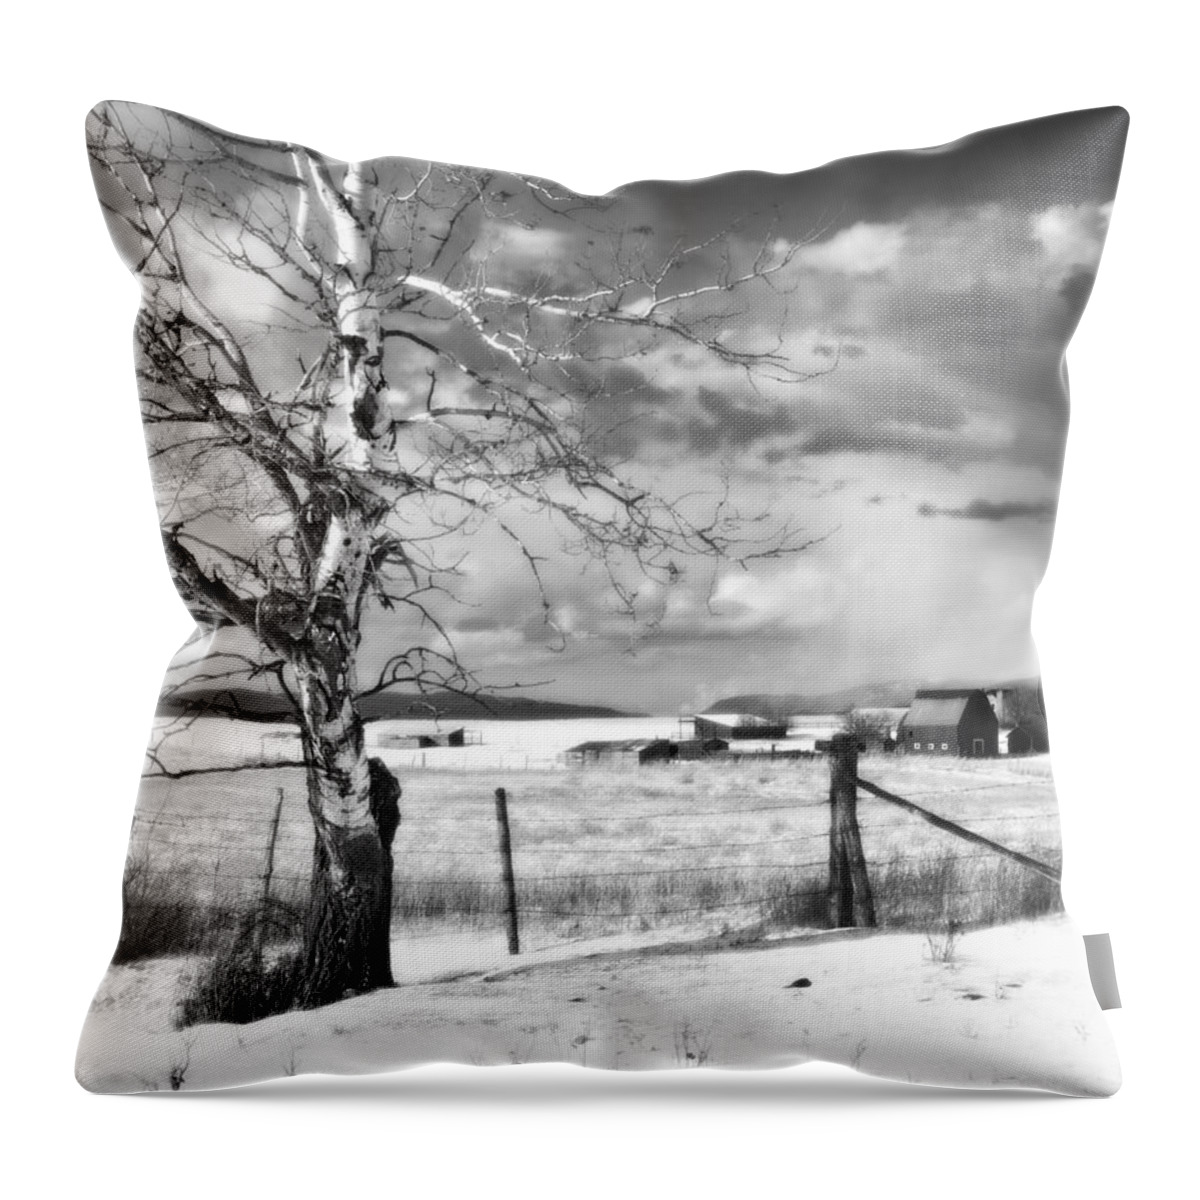 Snow Throw Pillow featuring the photograph Mid-winter Moonlight by Theresa Tahara